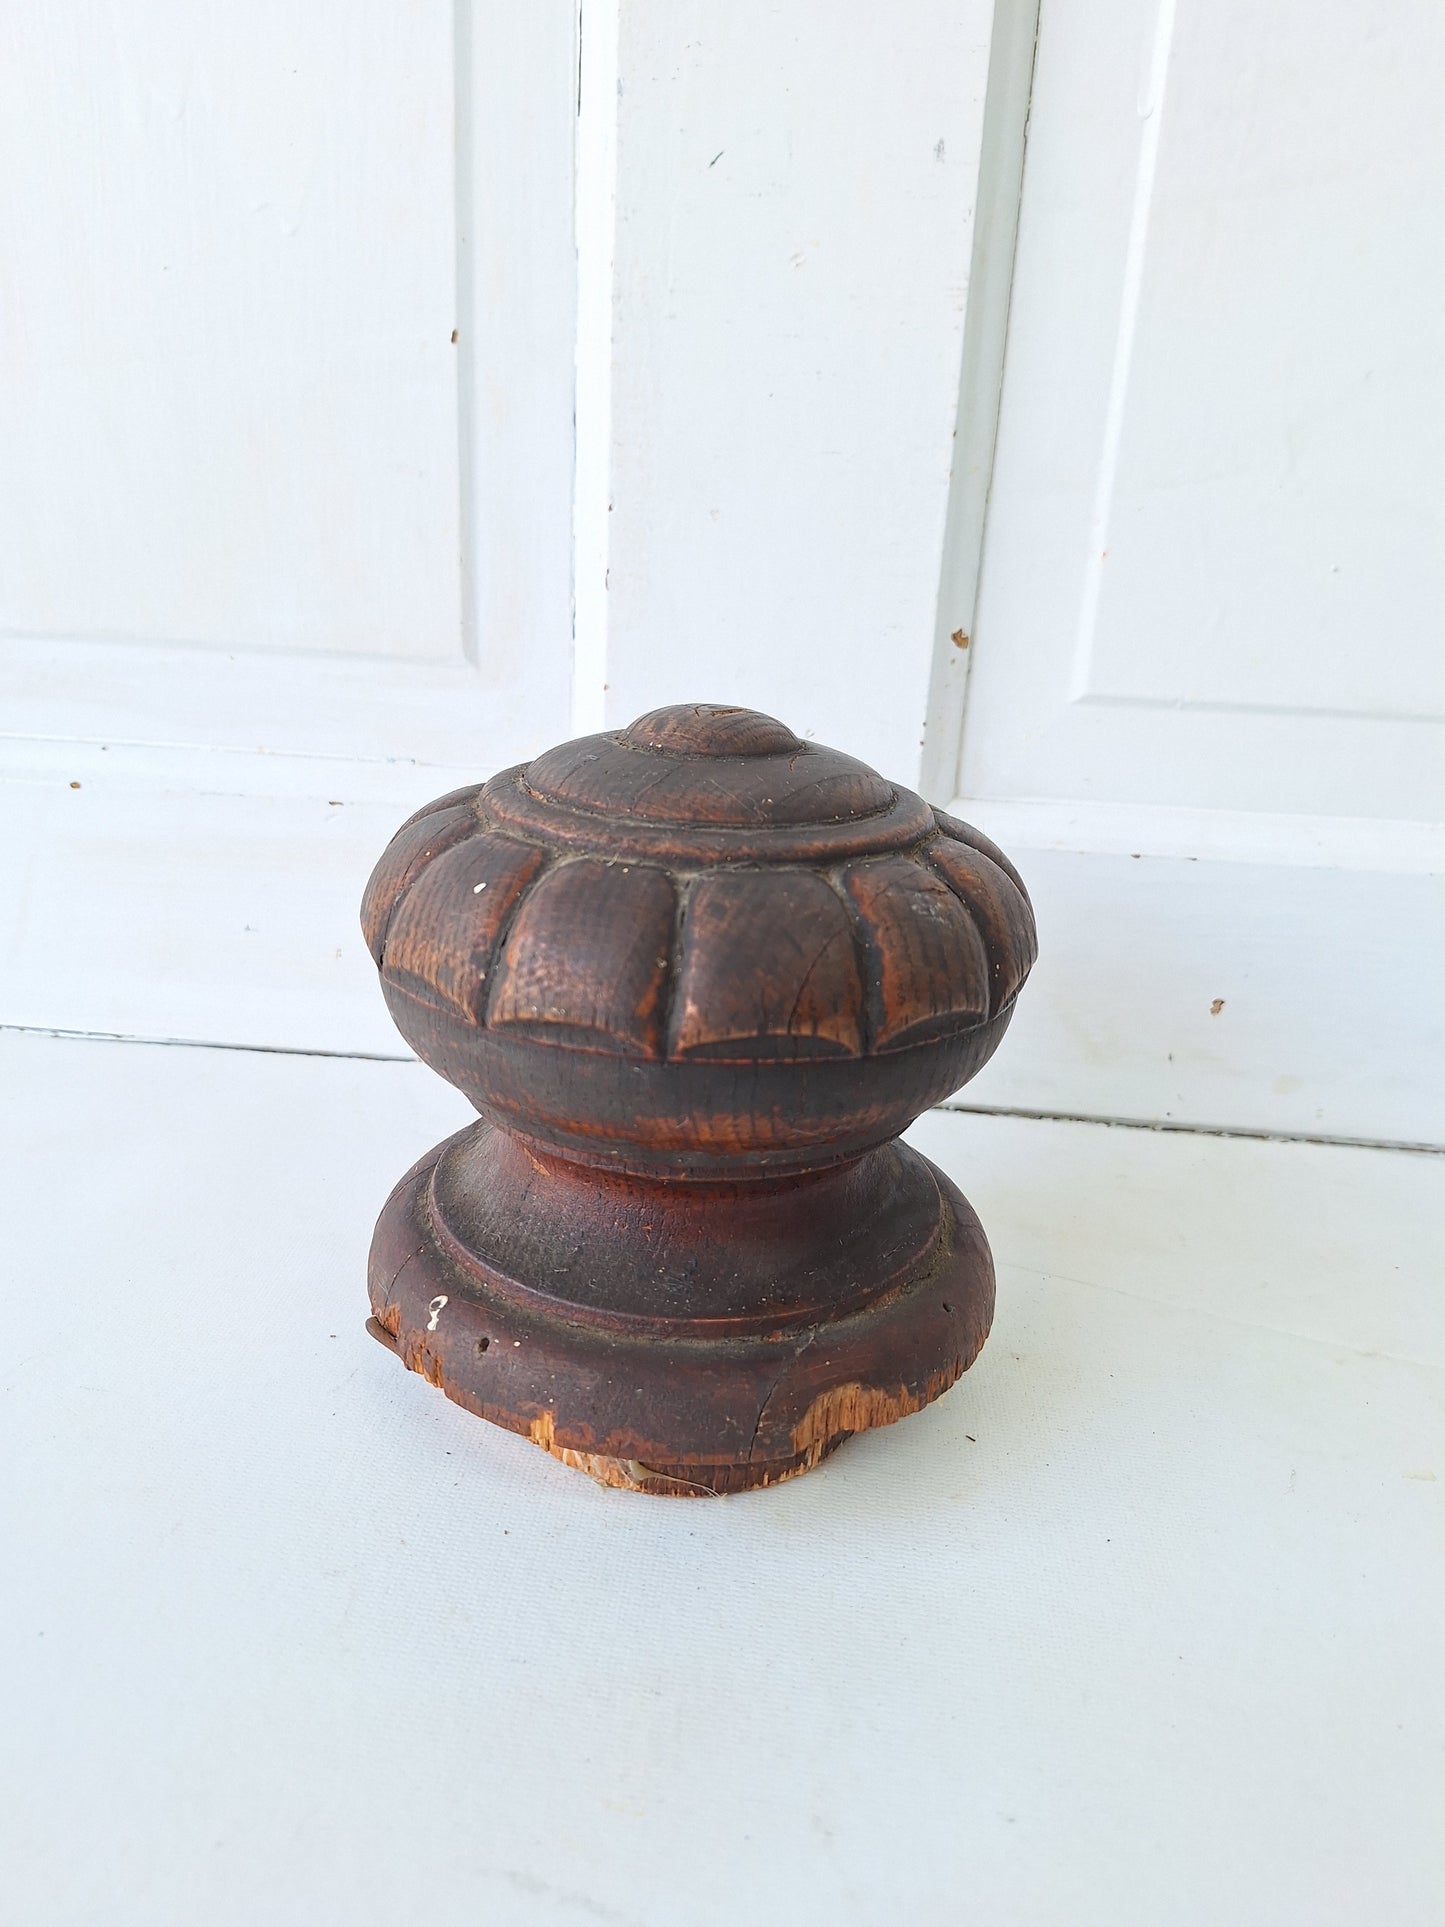 Antique Carved Newel Post Top, Victorian Era Staircase Newel Post Finial 040902